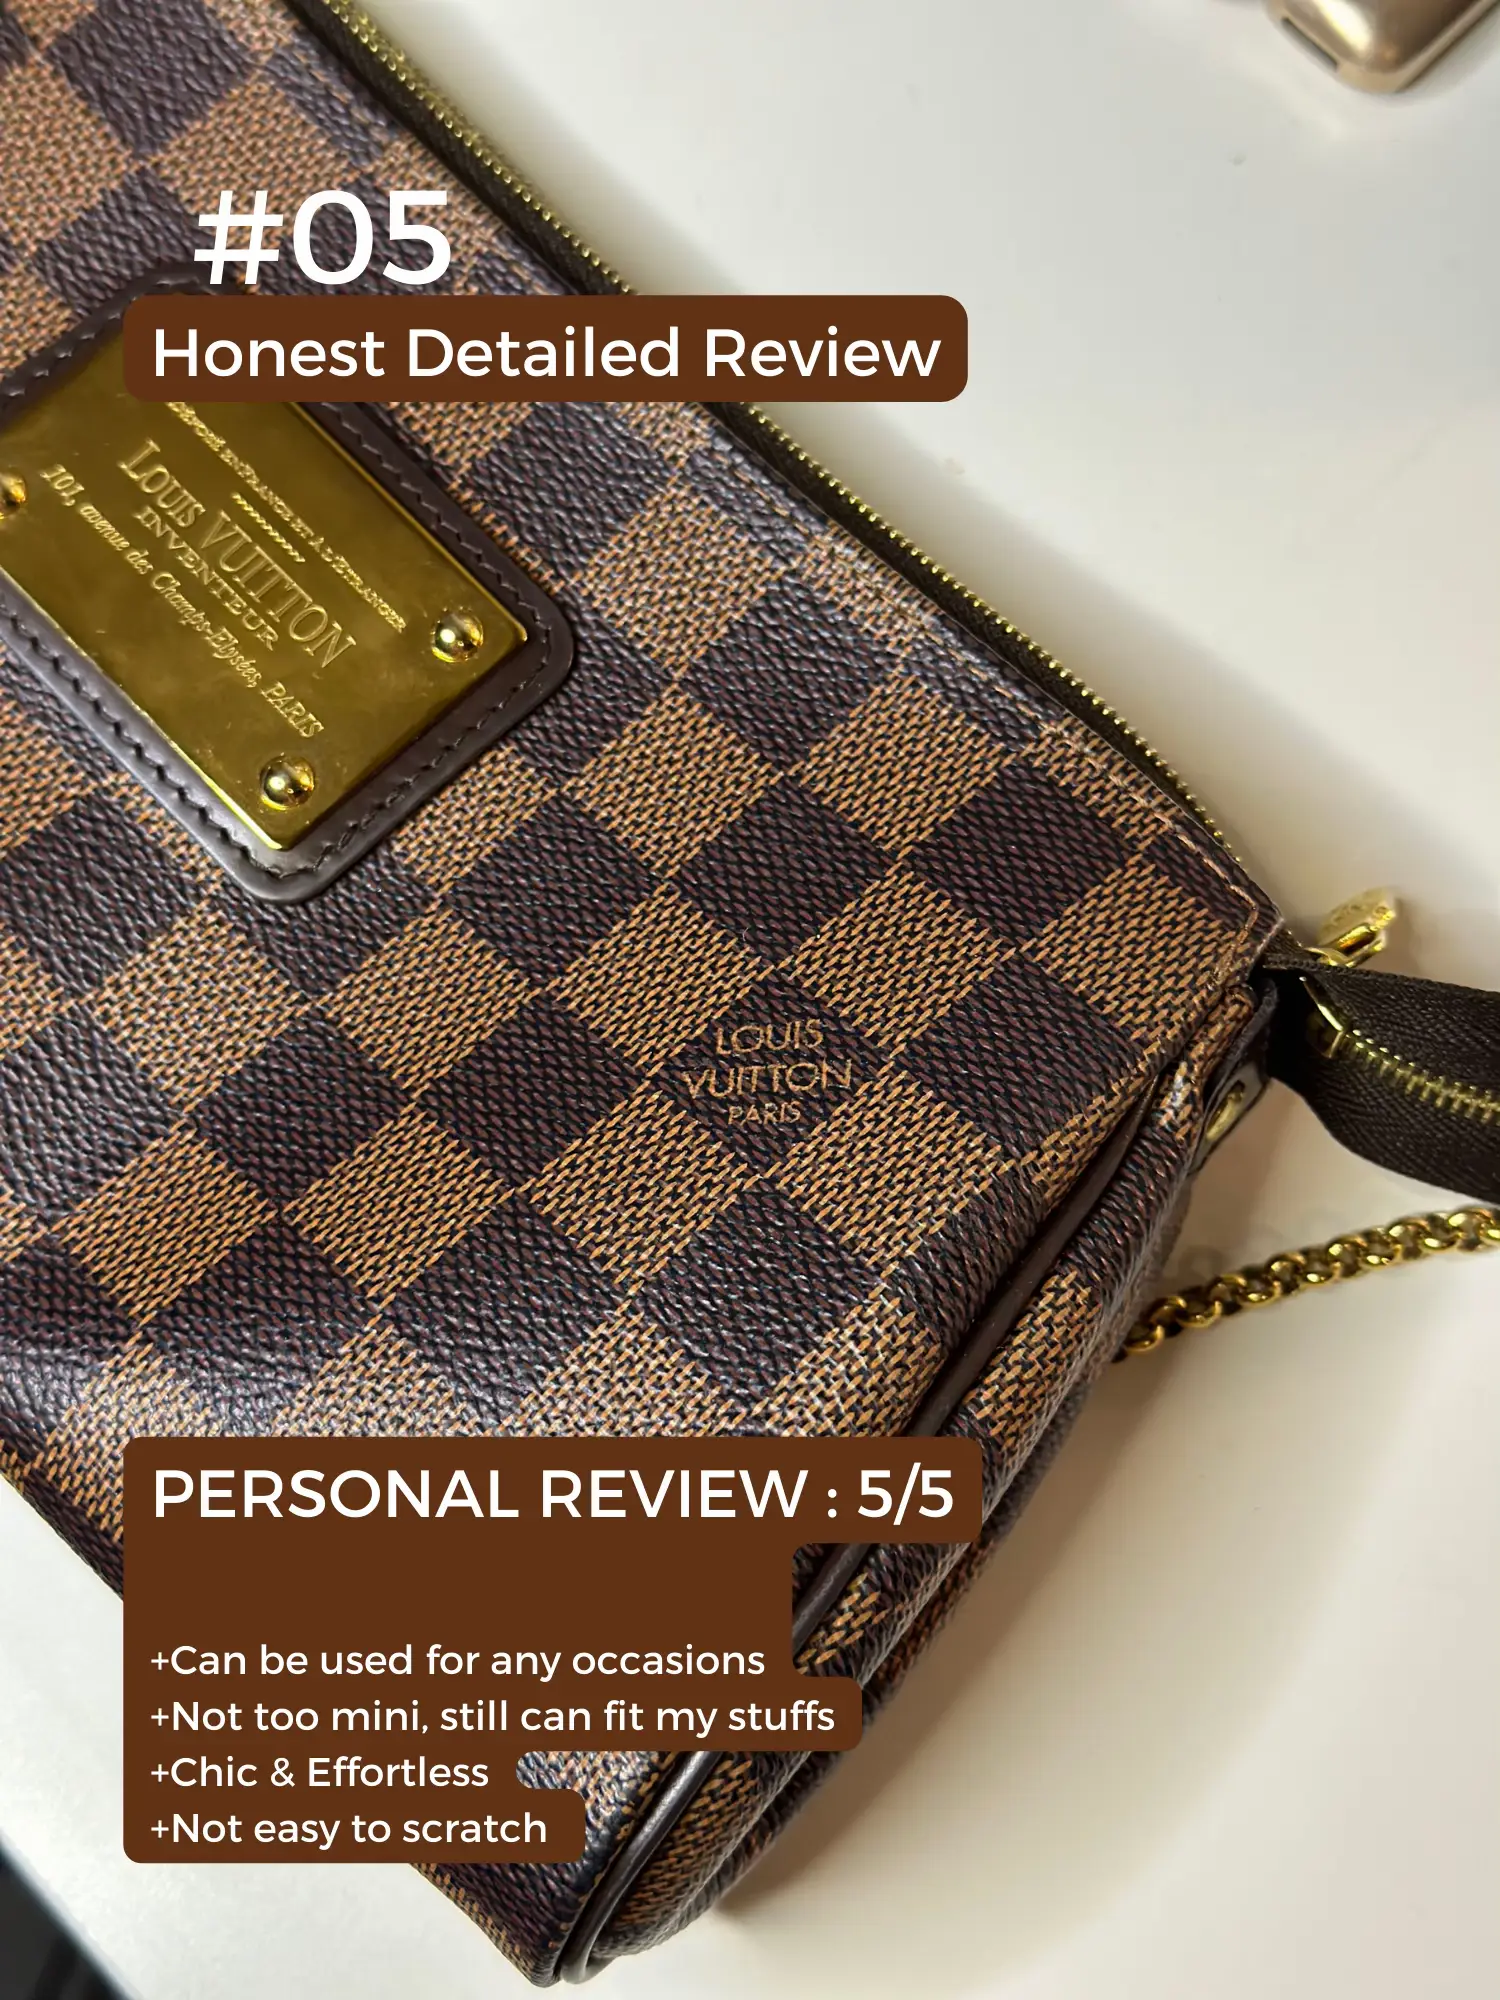 Review Louis Vuitton Nice Nano, Gallery posted by Livia.nvt